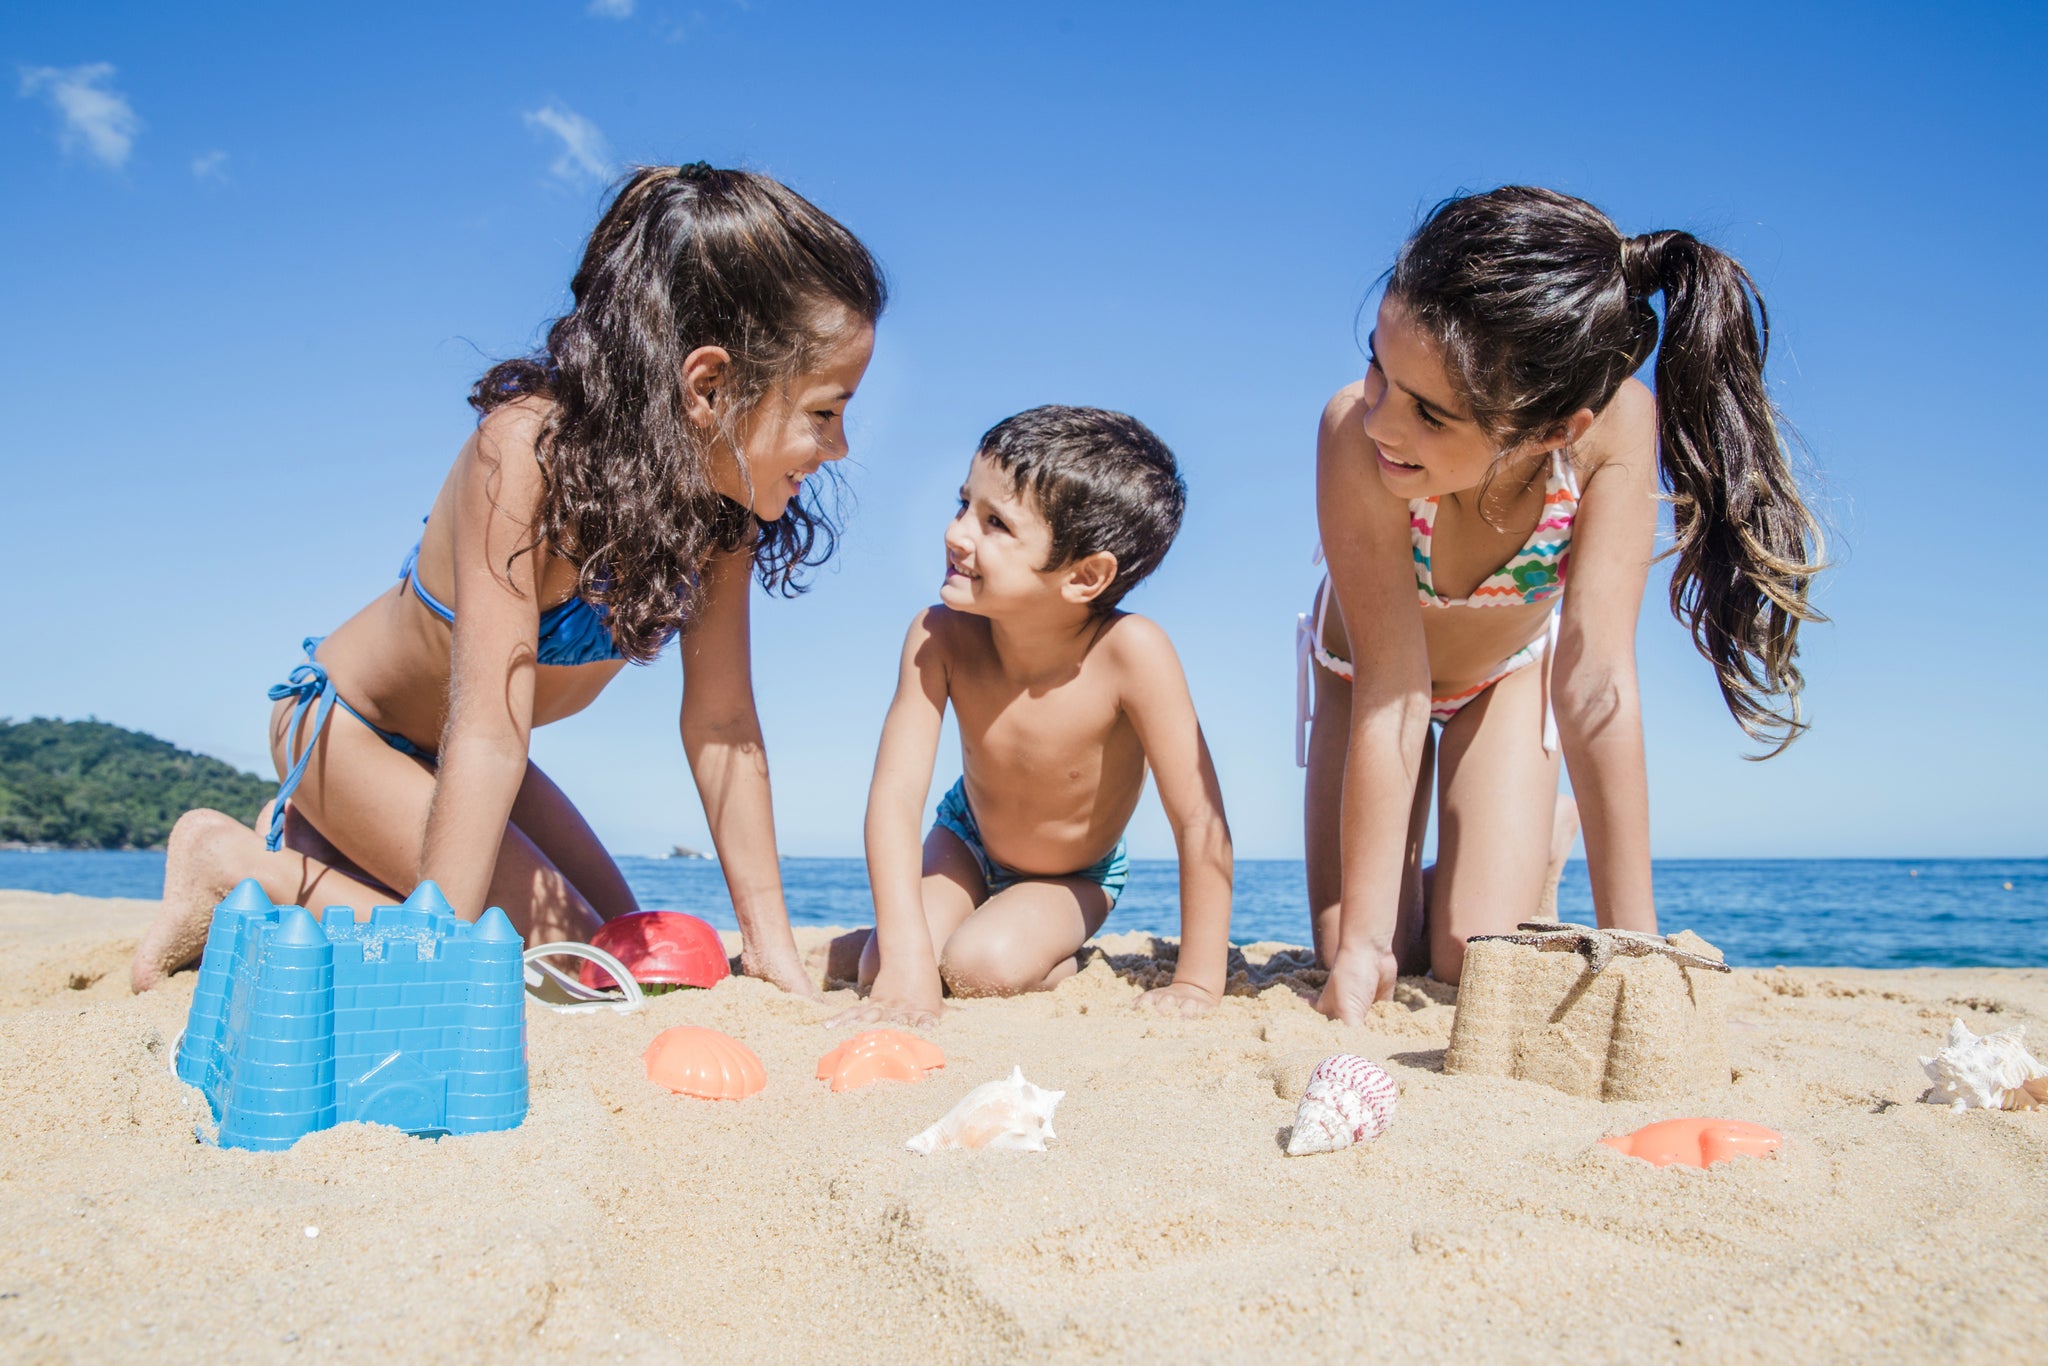 Sunscreens: Choosing the right kind